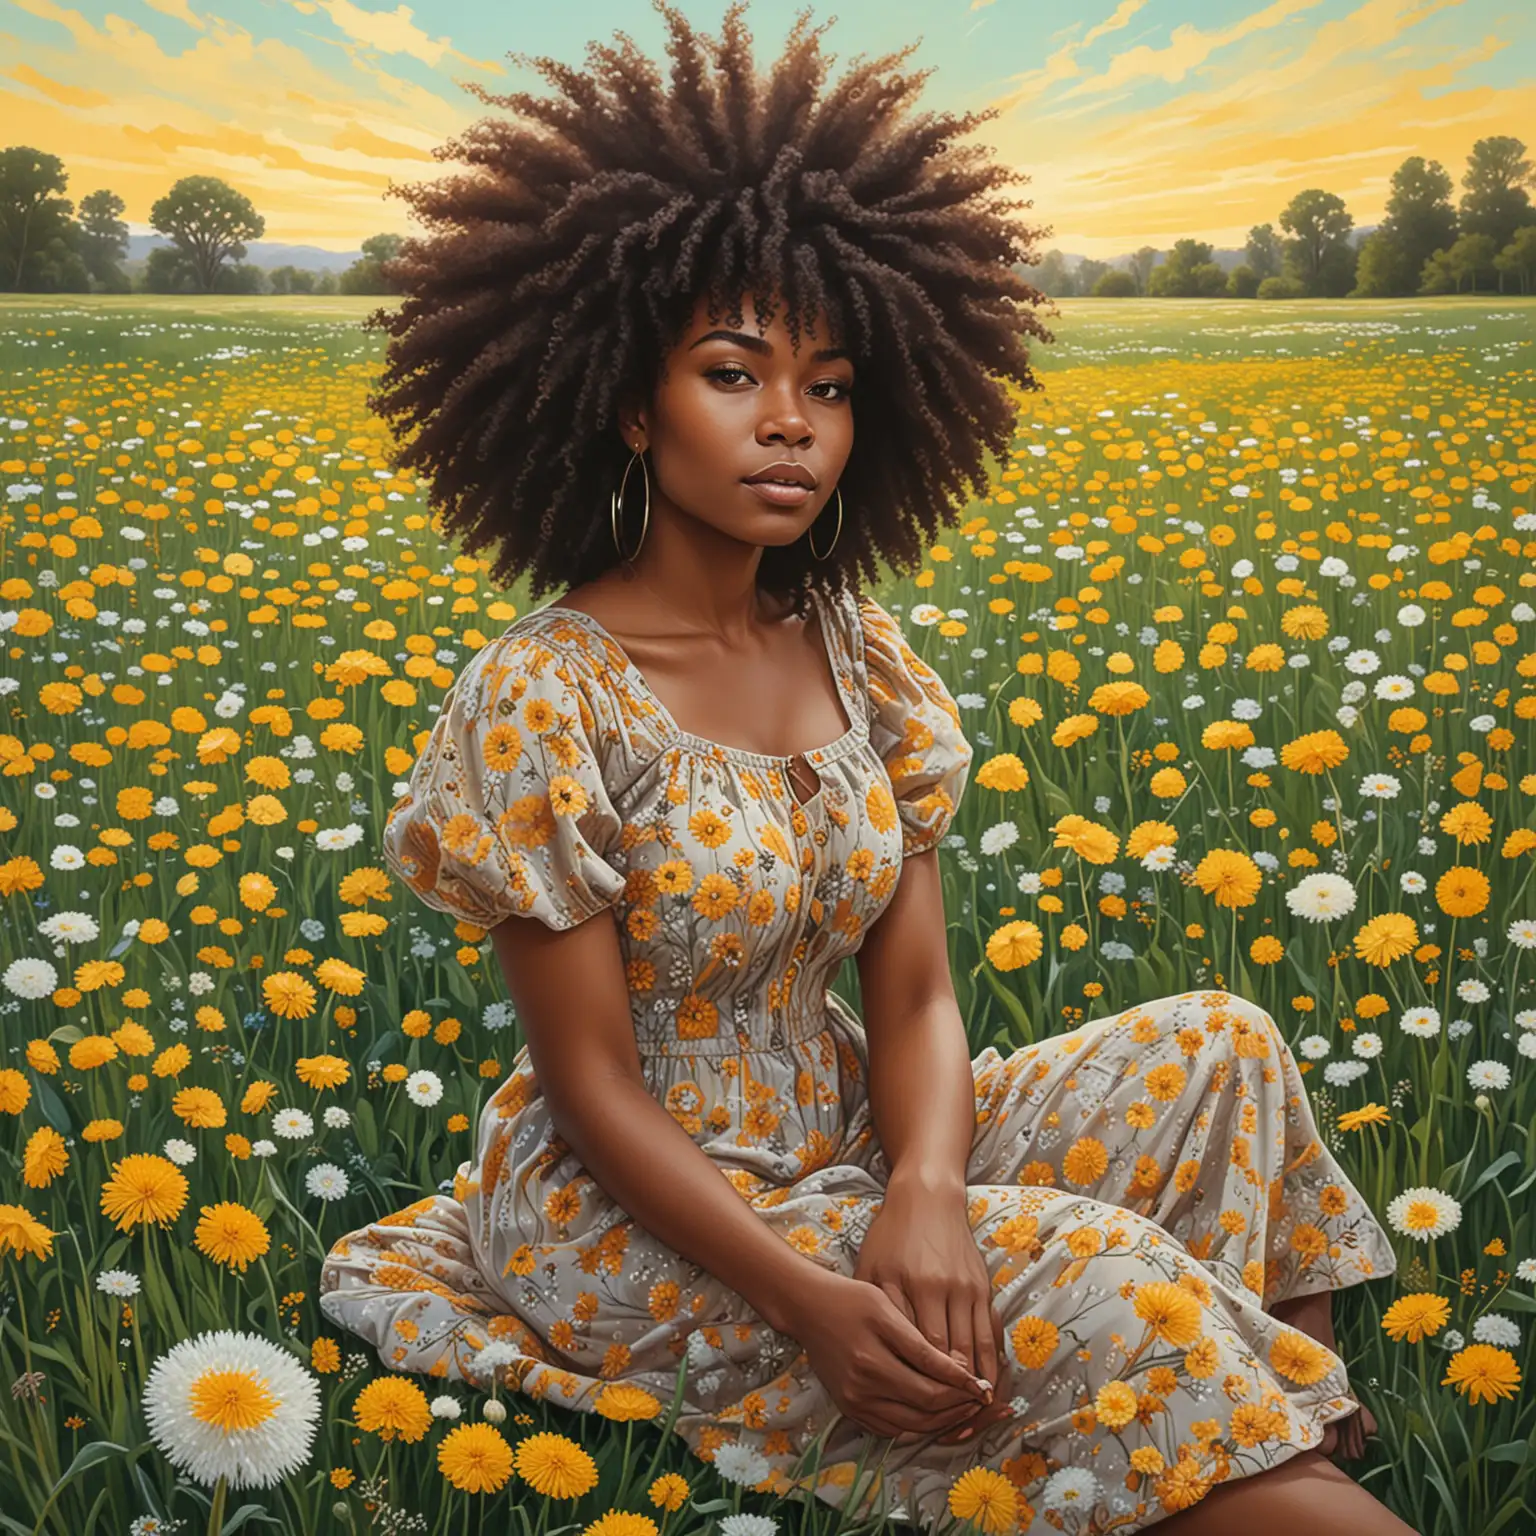 a painting of a woman sitting in a field of dandelions, afro made of flowers, by Pamela Ascherson, nature goddess, by Art Green, goddess of nature, a goddess in a field of flowers, by Dulah Marie Evans, by Helen Thomas Dranga, by Tracy Harris, queen of nature, by Pamela Coleman Smith, gorgeous art, by Yvonne Jacquette
